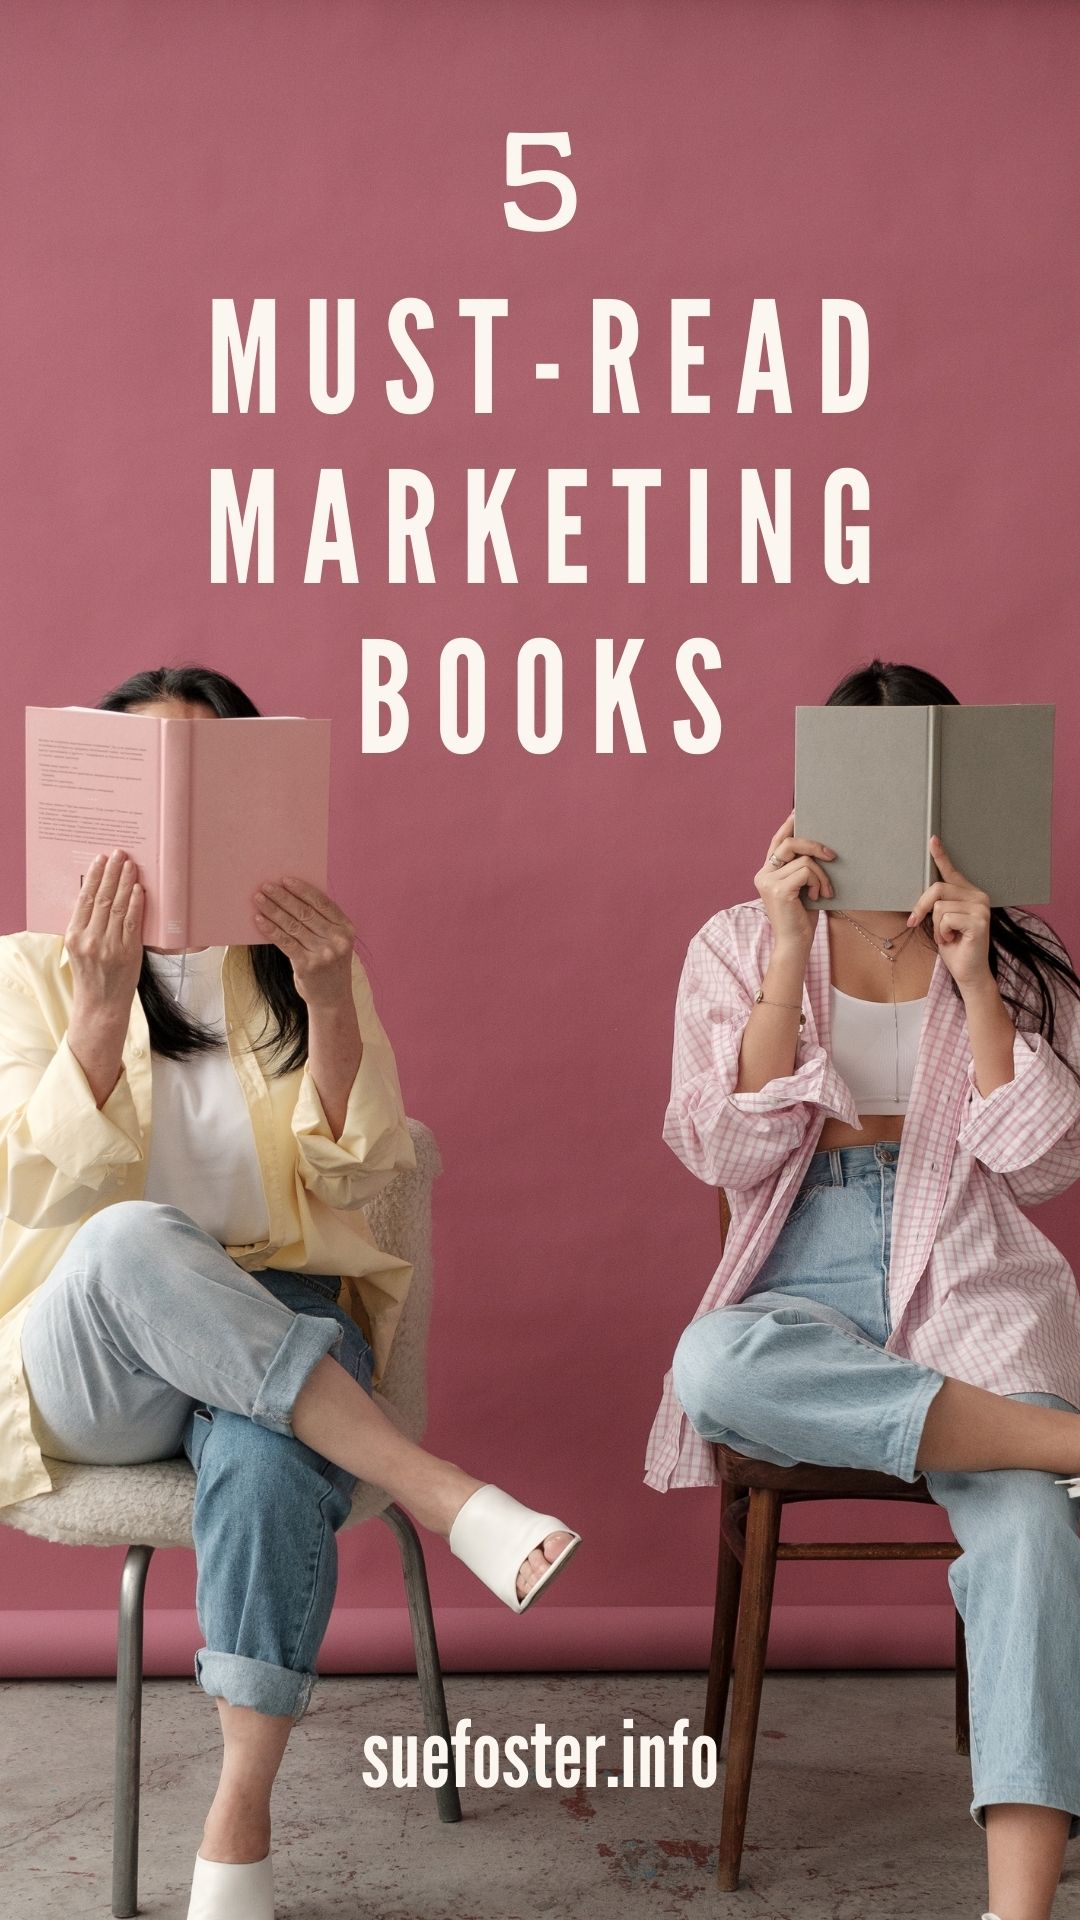 Want to take your marketing game to the next level? Well, it might be time to open a good book.